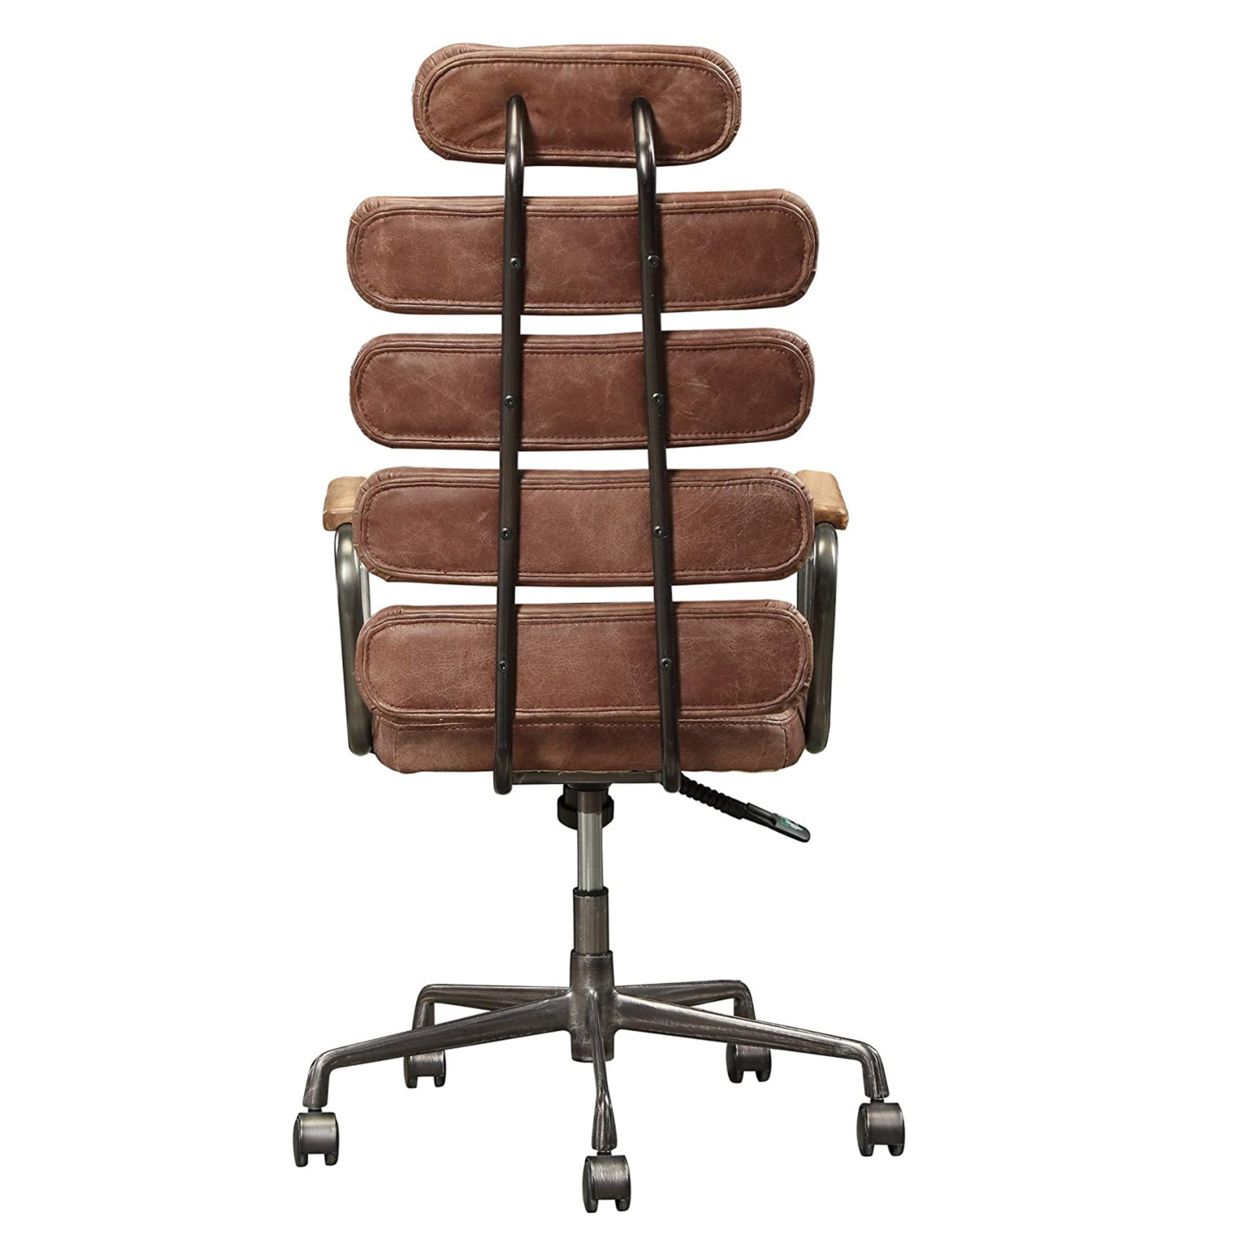 Leatherette Metal Swivel Executive Chair With Five Horizontal Panels Backrest, Brown And Gray- Saltoro Sherpi